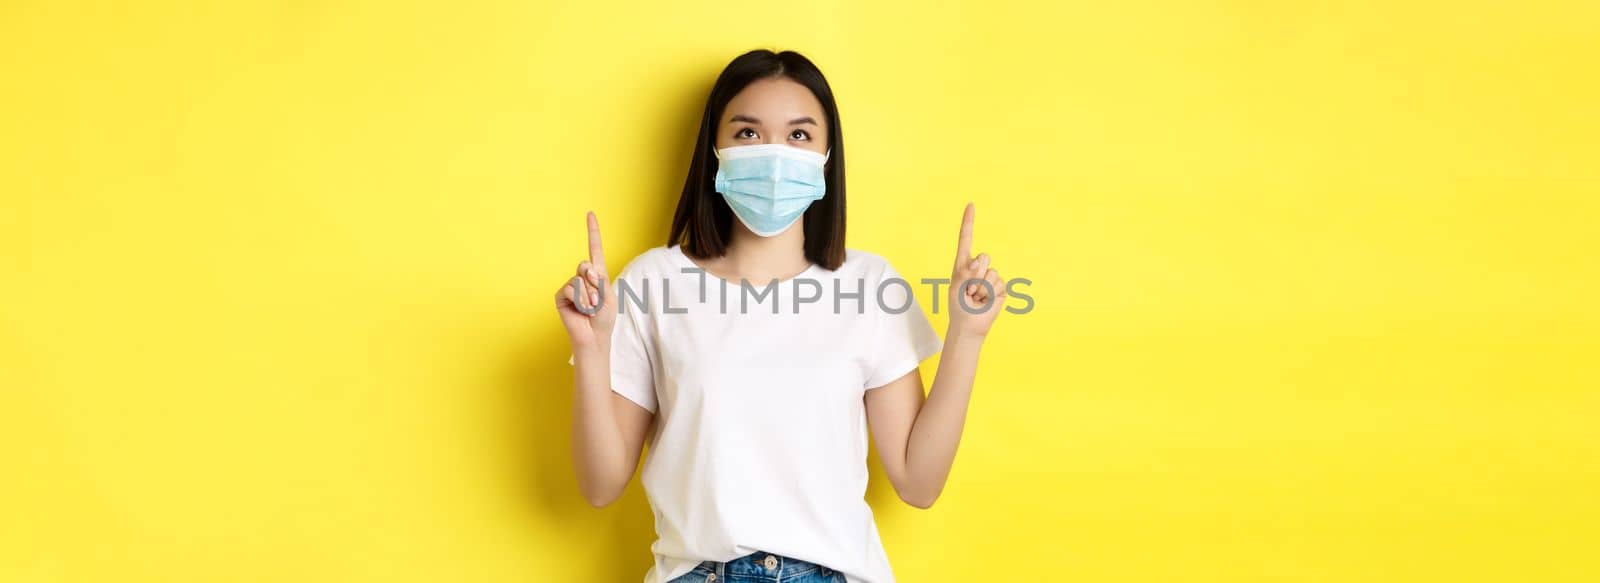 Covid-19, pandemic and social distancing concept. Young asian woman in white t-shirt and medical mask from coronavirus, looking and pointing fingers up, showing special offer.